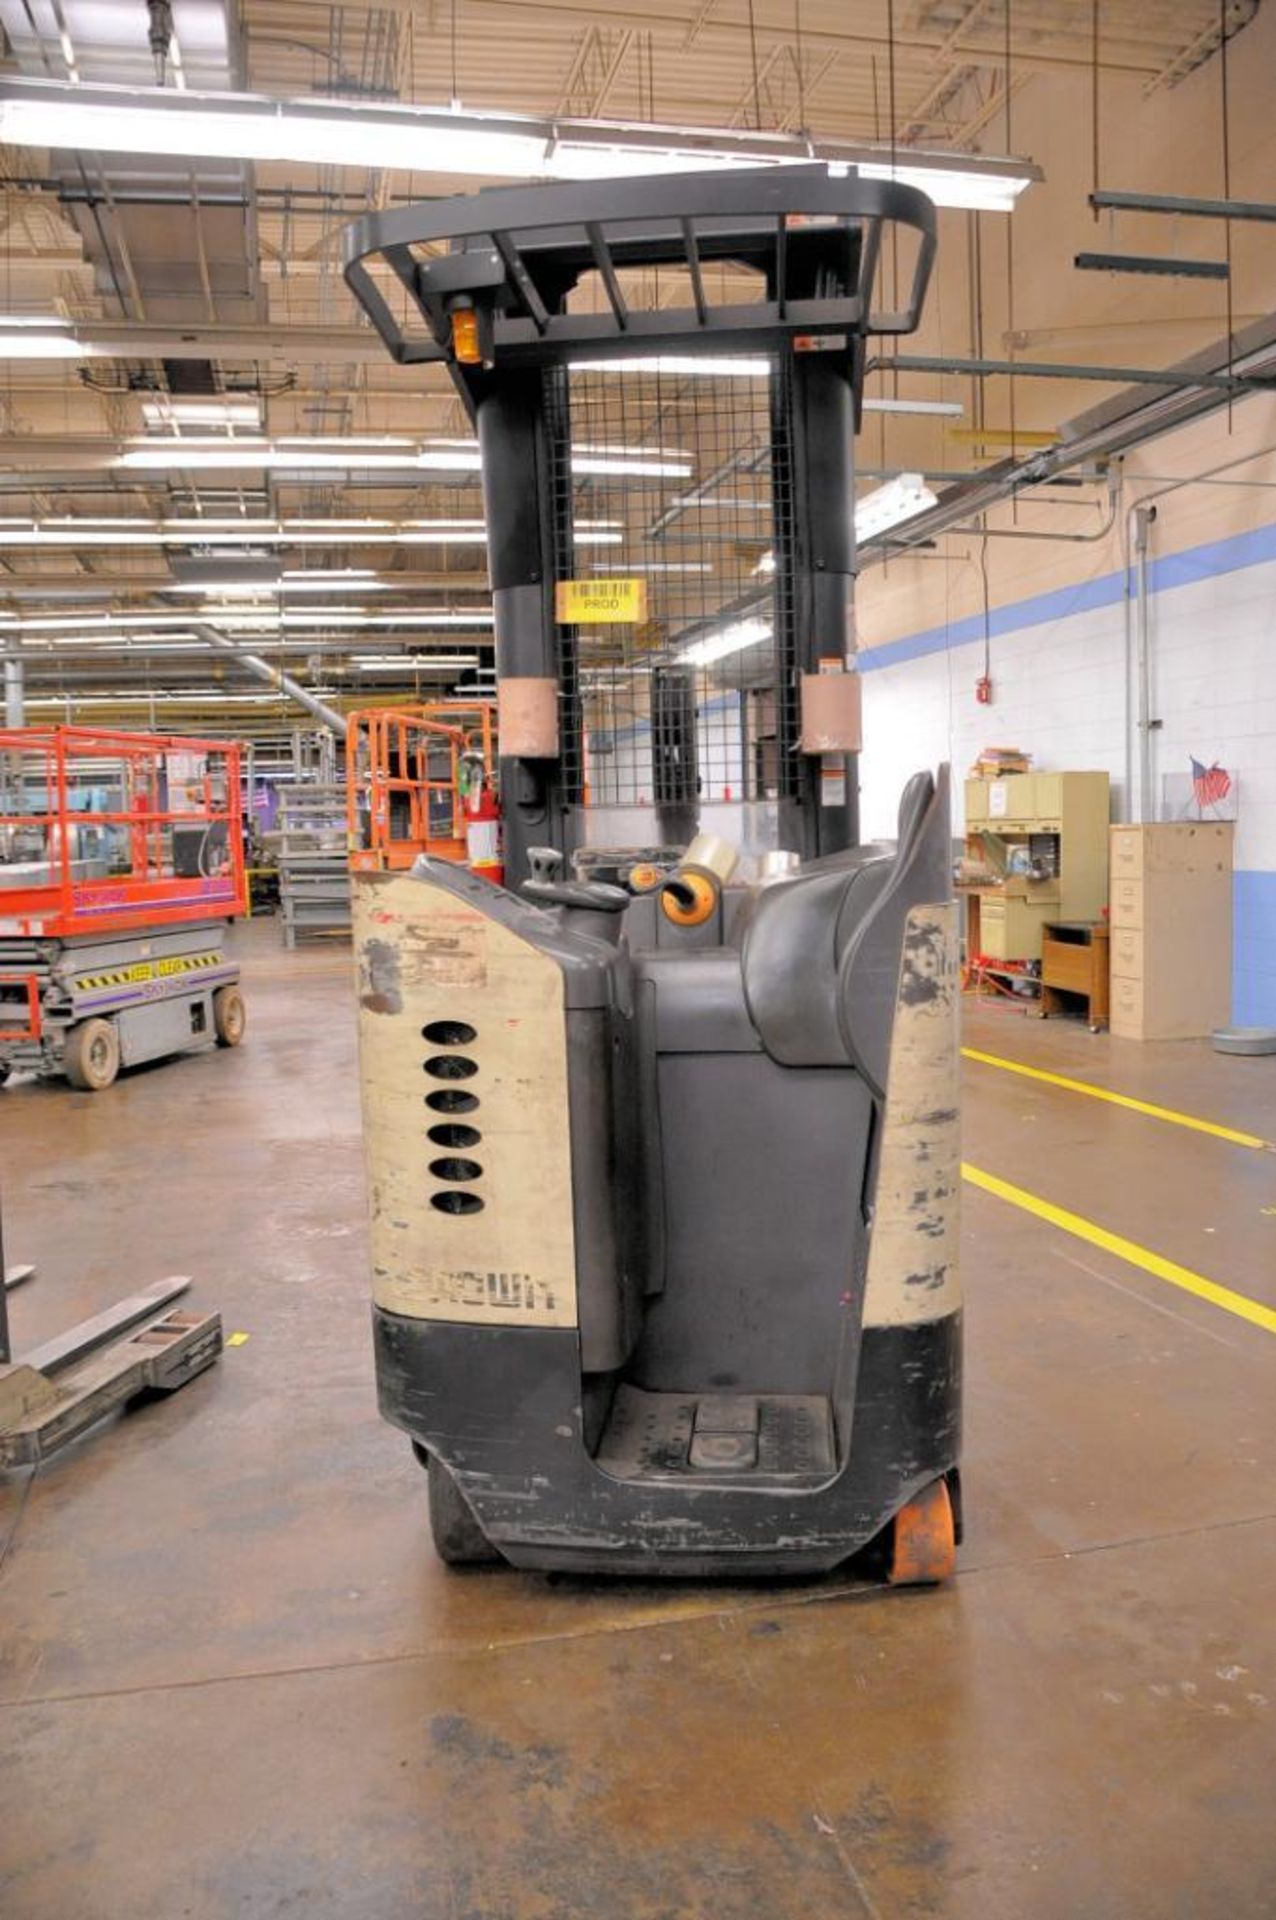 Crown 5200 Series 3,000-lb. Capacity Electric Standup Forklift Truck, S/N: 1A248393 - Image 3 of 5